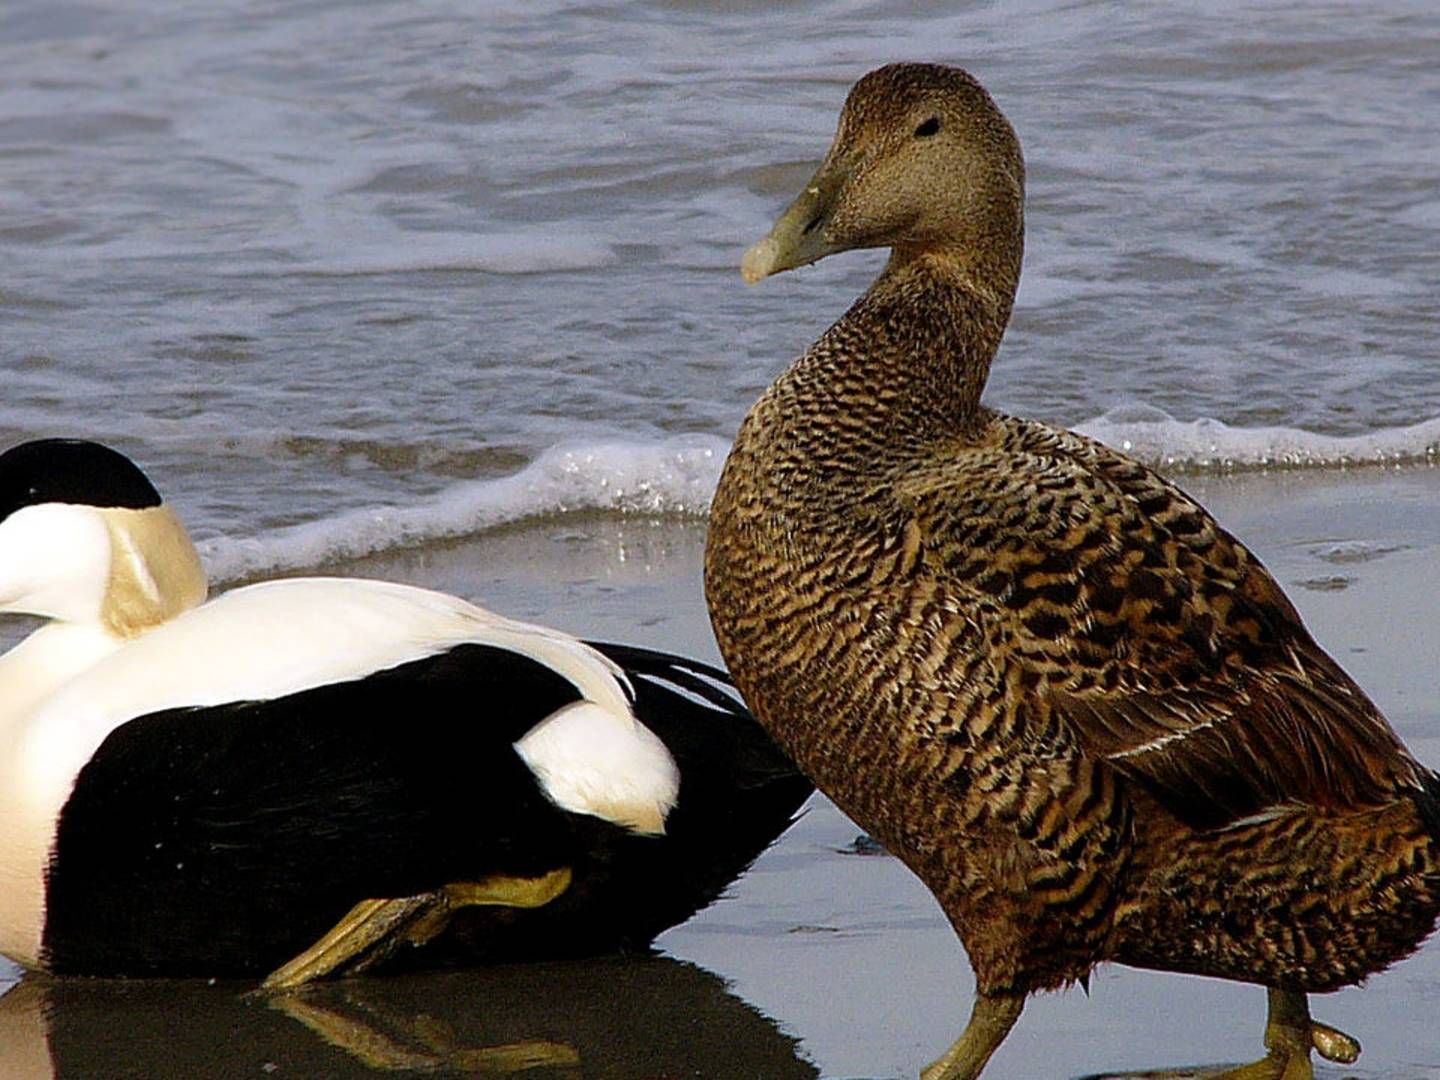 Common eiders, male and female, in southern Denmark. | Photo: CREATIVE COMMONS